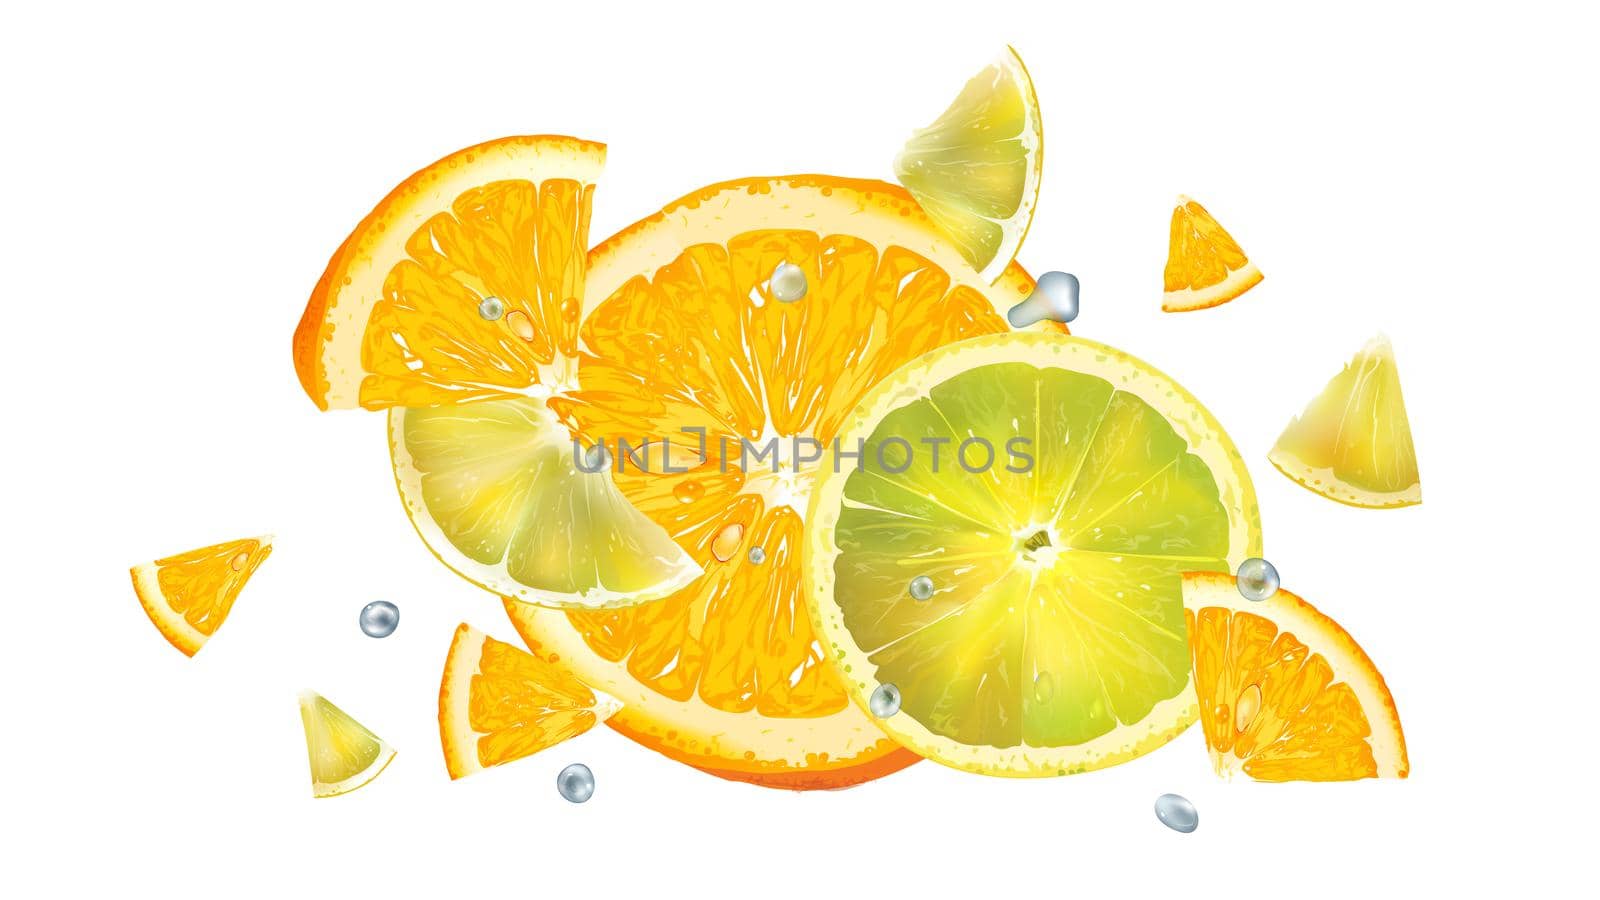 Sliced orange and lemon with water droplets scatter in different directions. Realistic style illustration.